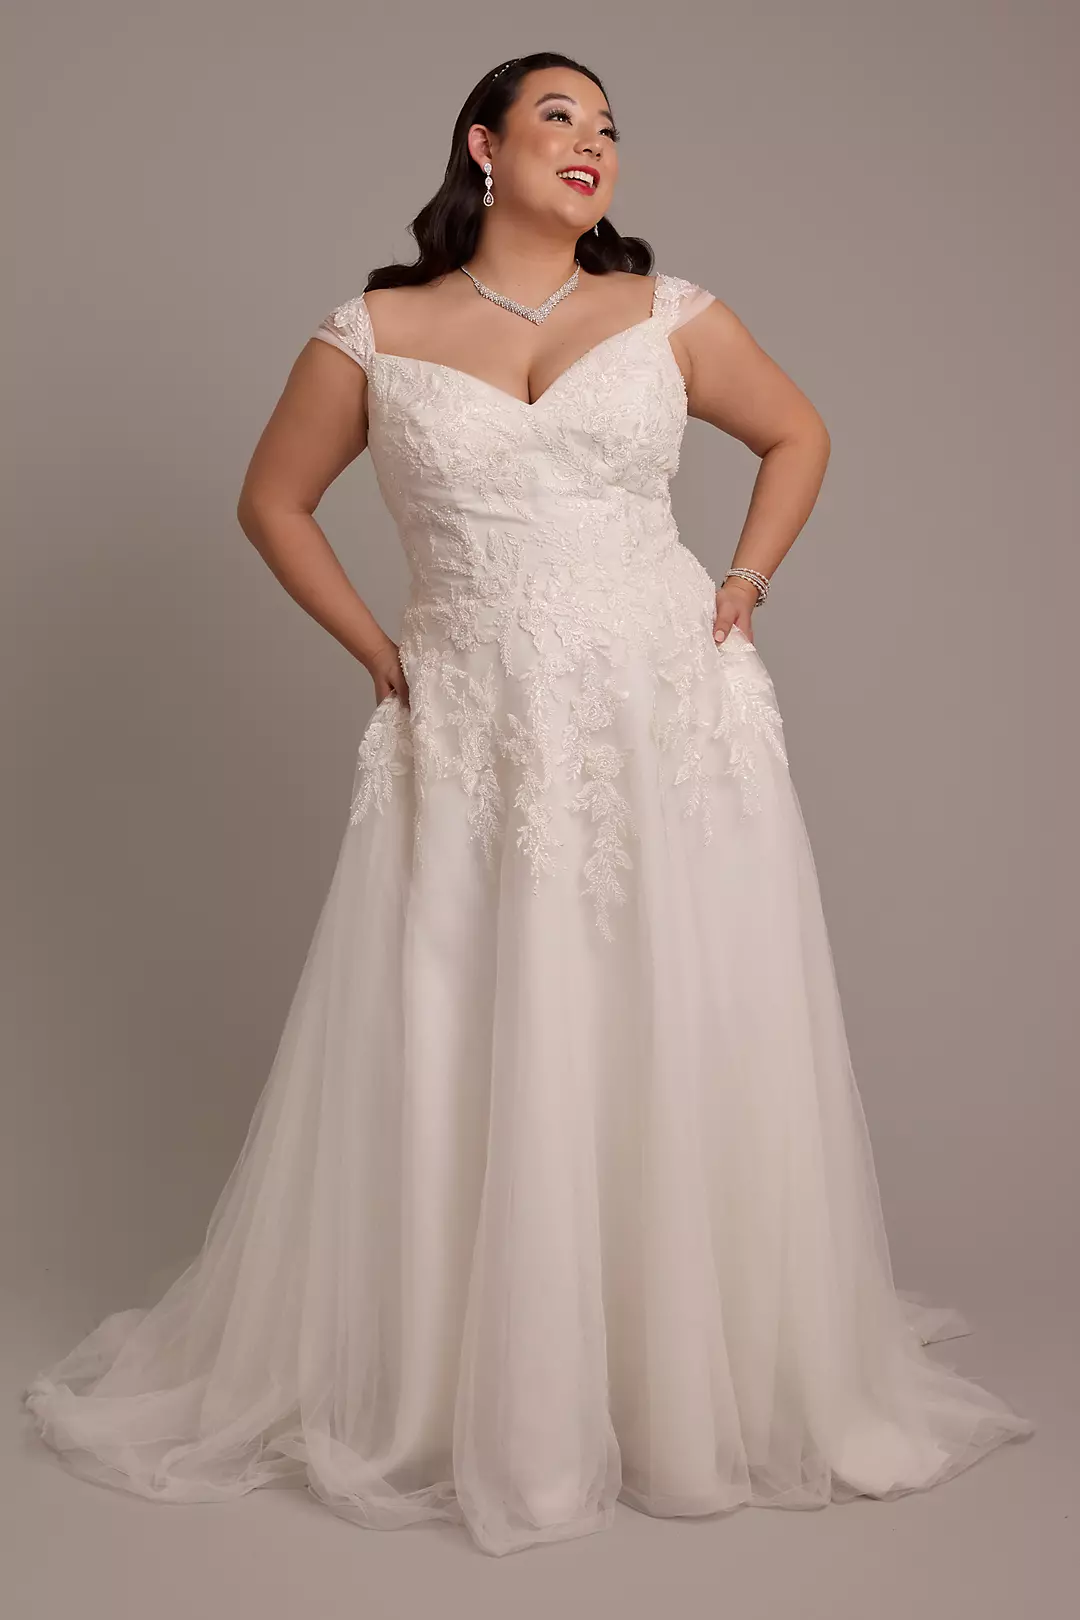 Tulle A-line Wedding Dress with Floral Appliques Image